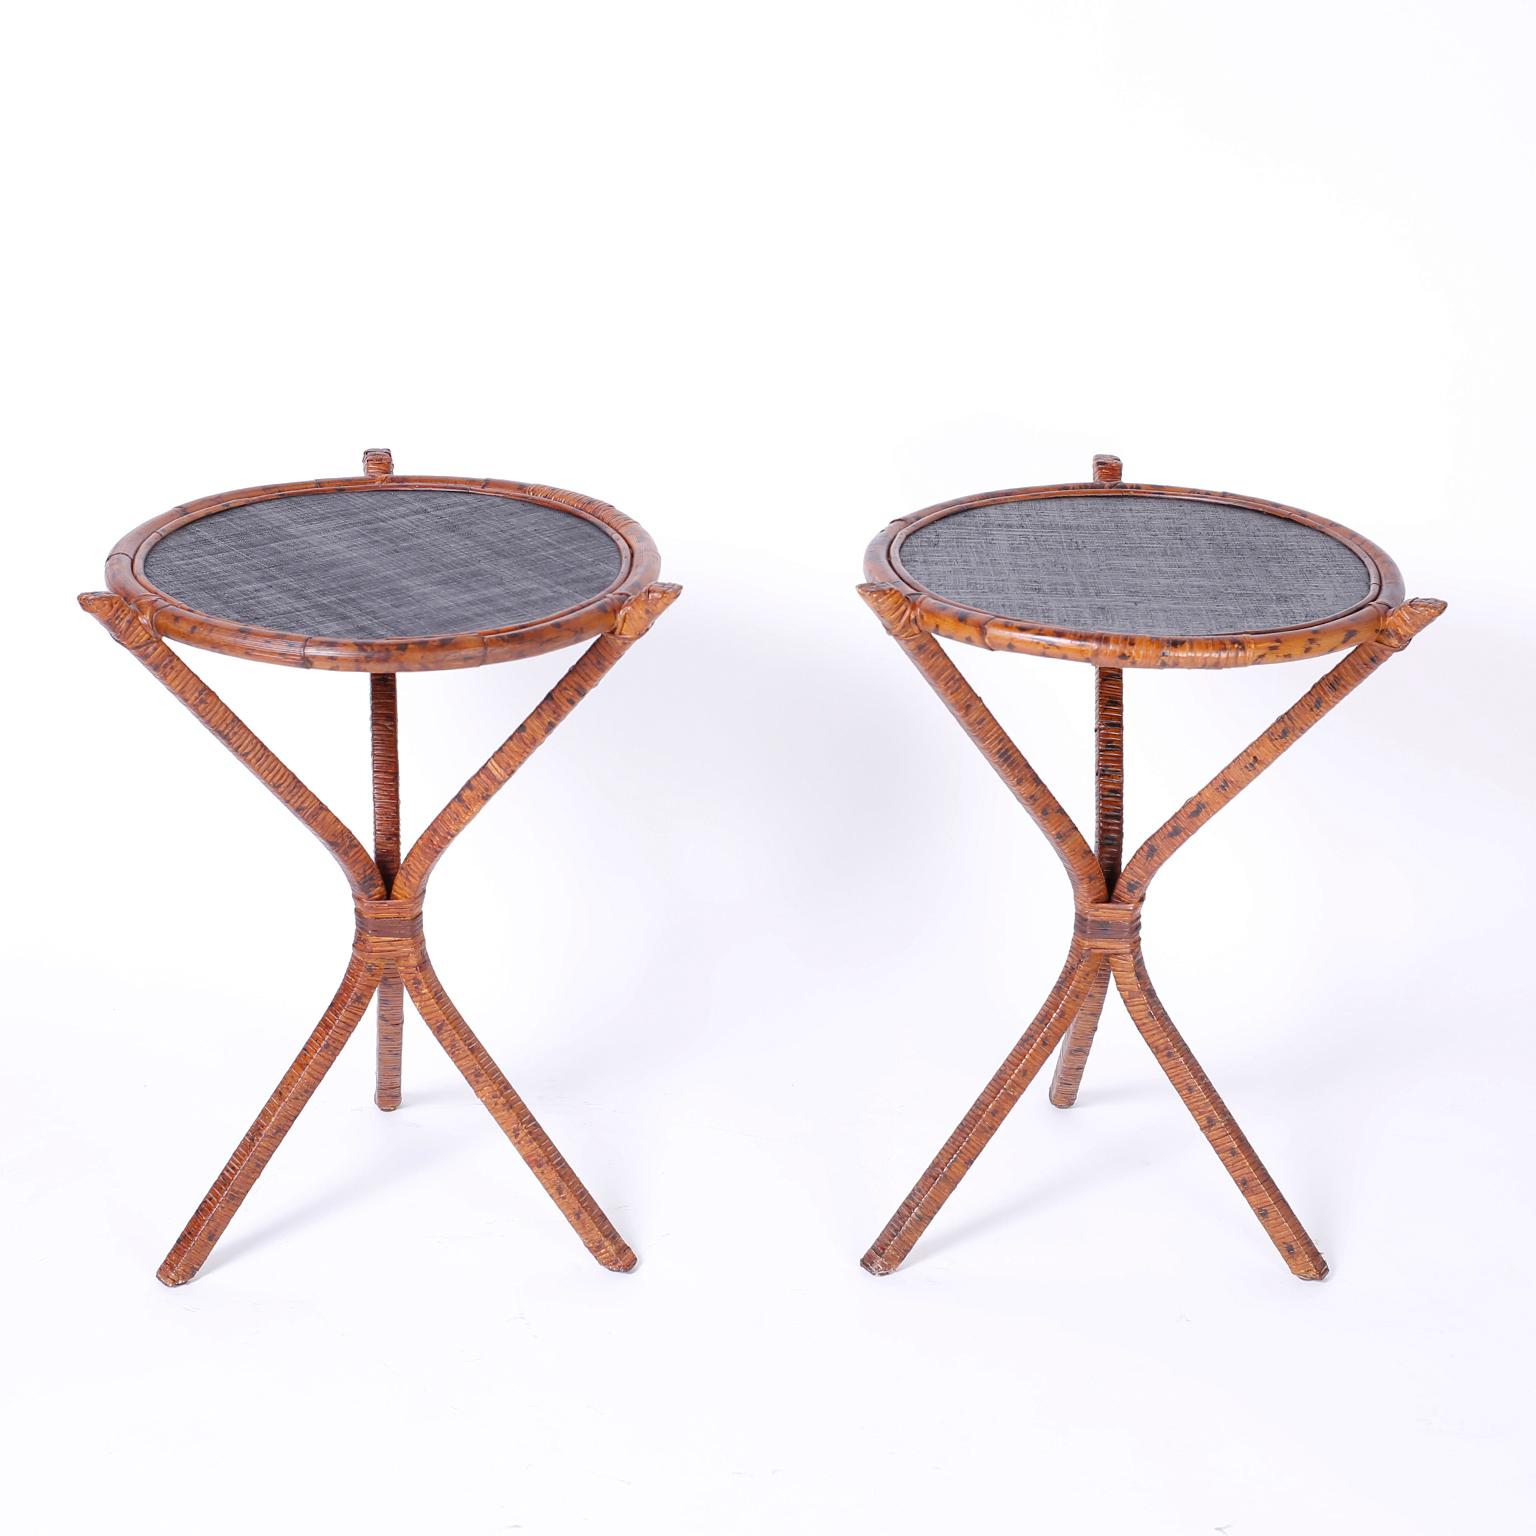 British colonial style stands with round tops framed with bent bamboo around a grasscloth surface. The bases are reed or wicker wrapped around a metal frame with a faux burnt bamboo finish. We have another pair of these tables, if 4 is required.